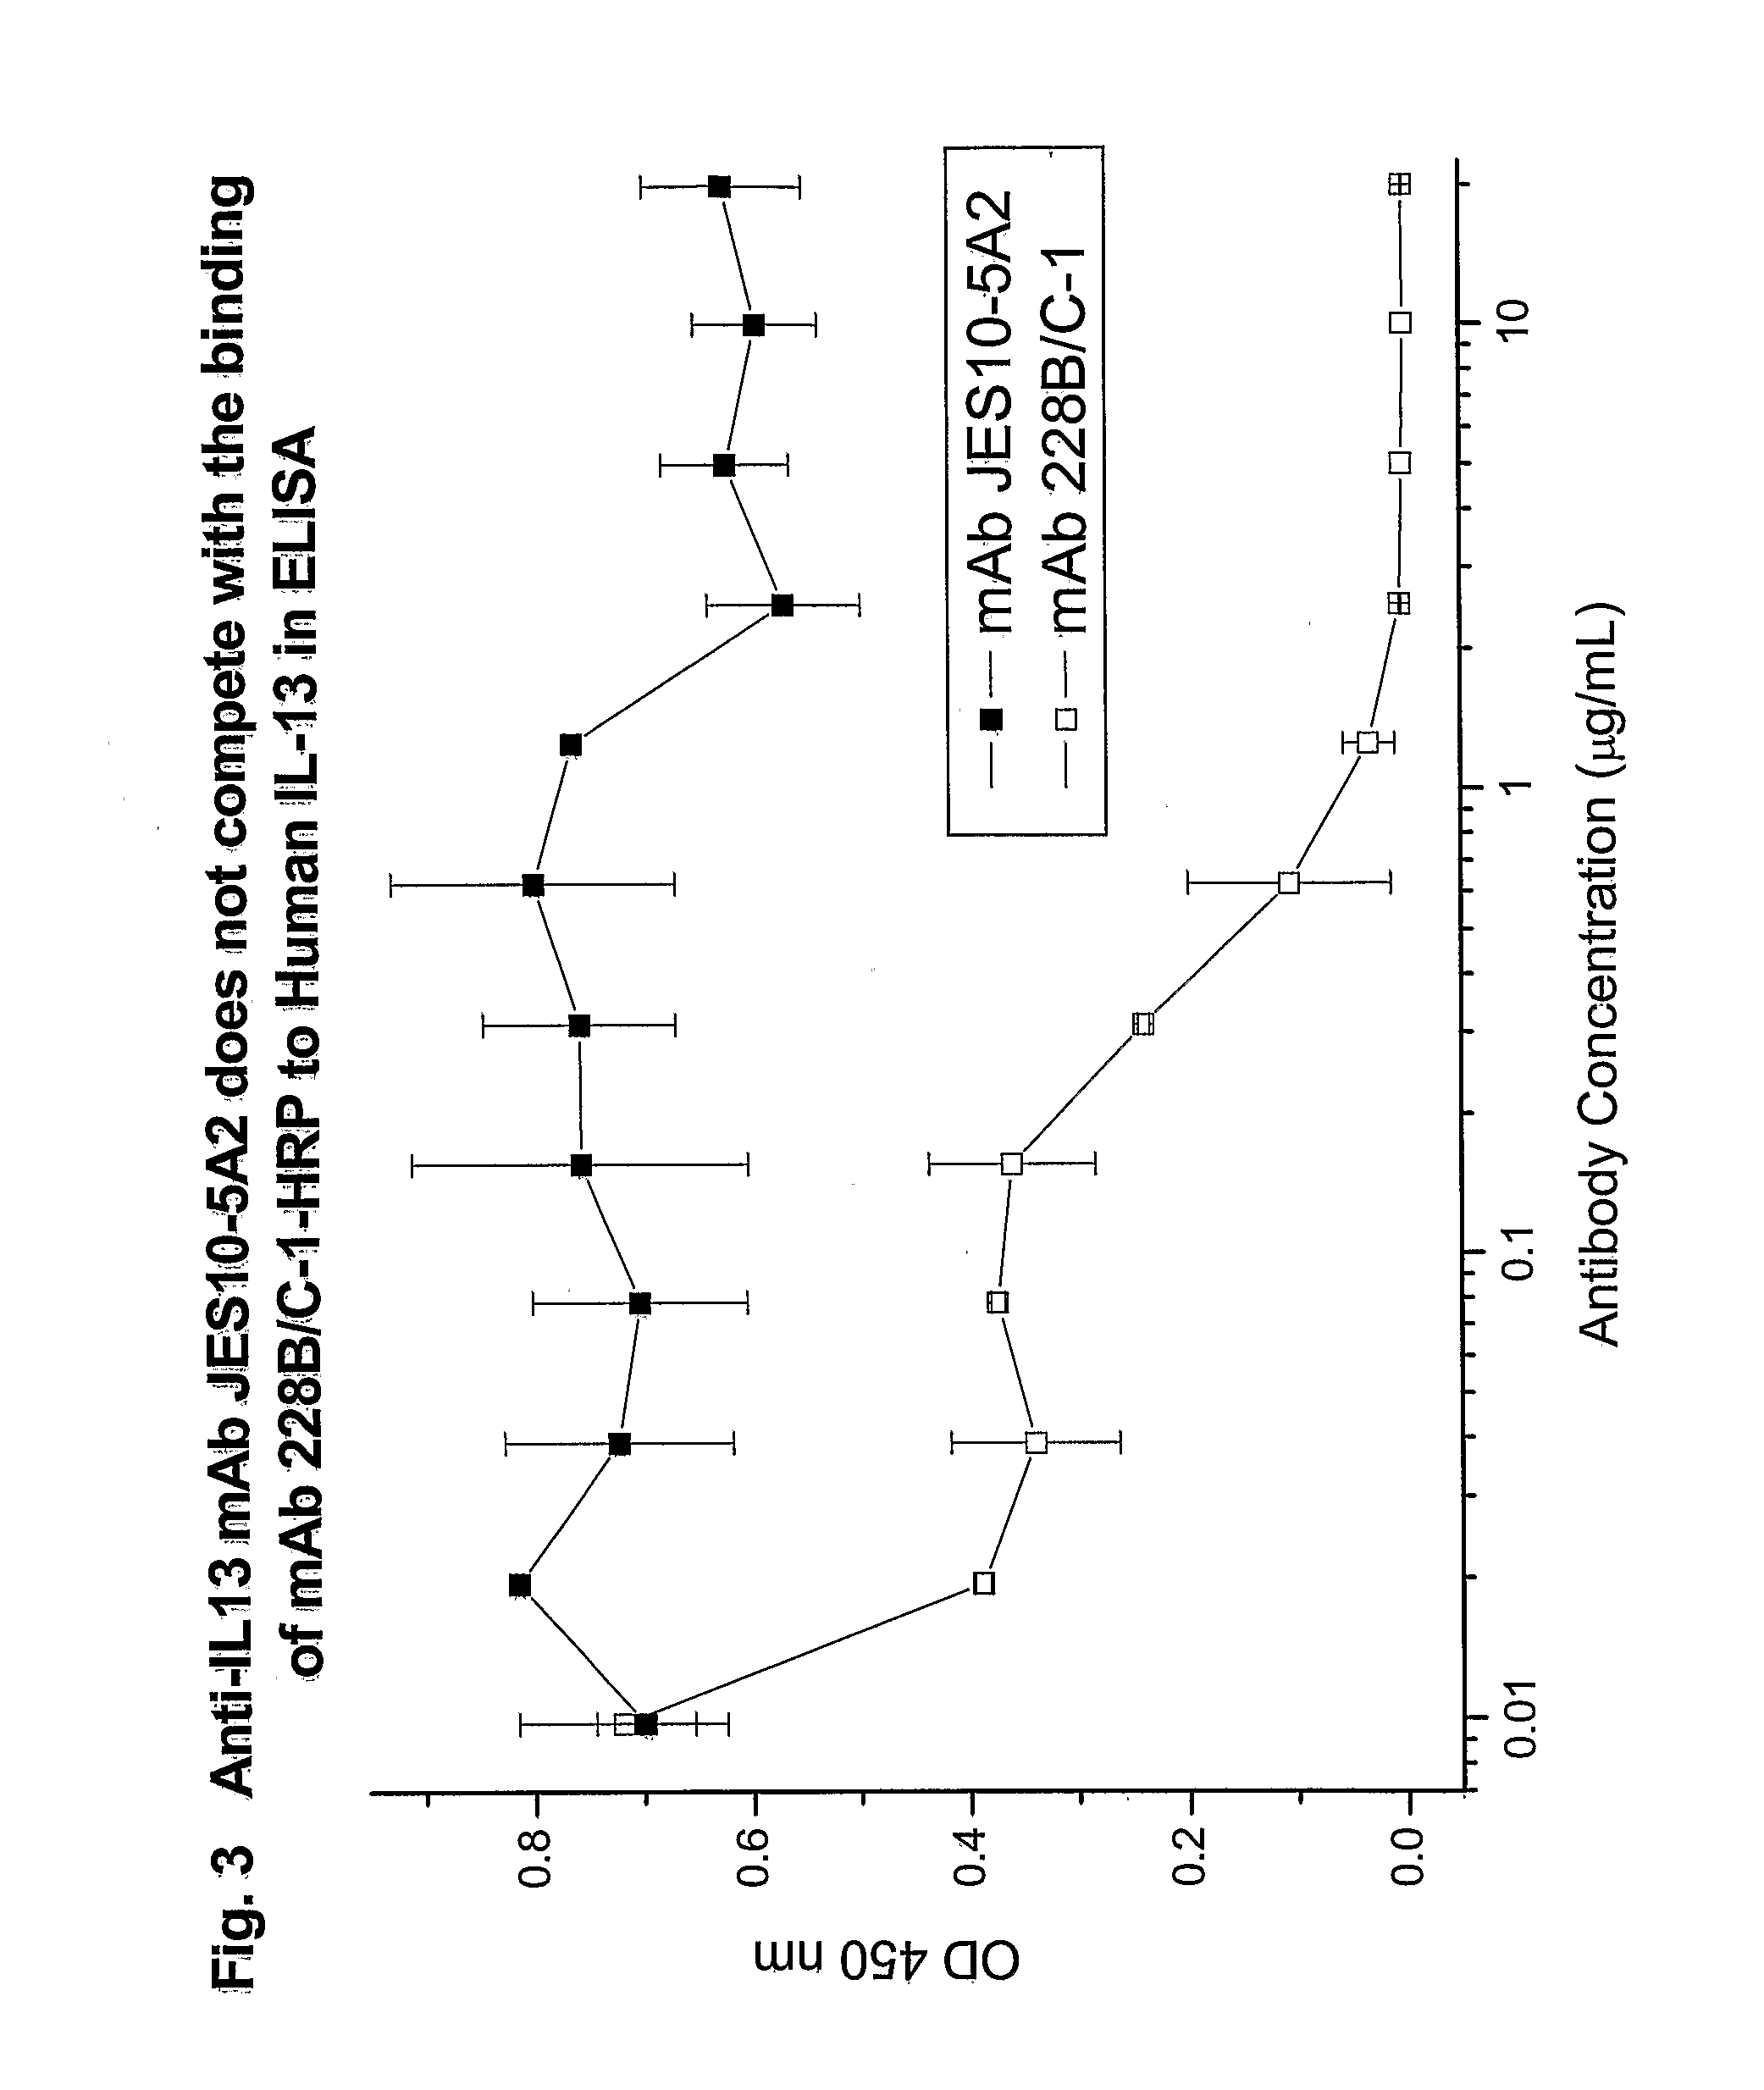 Novel anti-IL13 antibodies and uses thereof